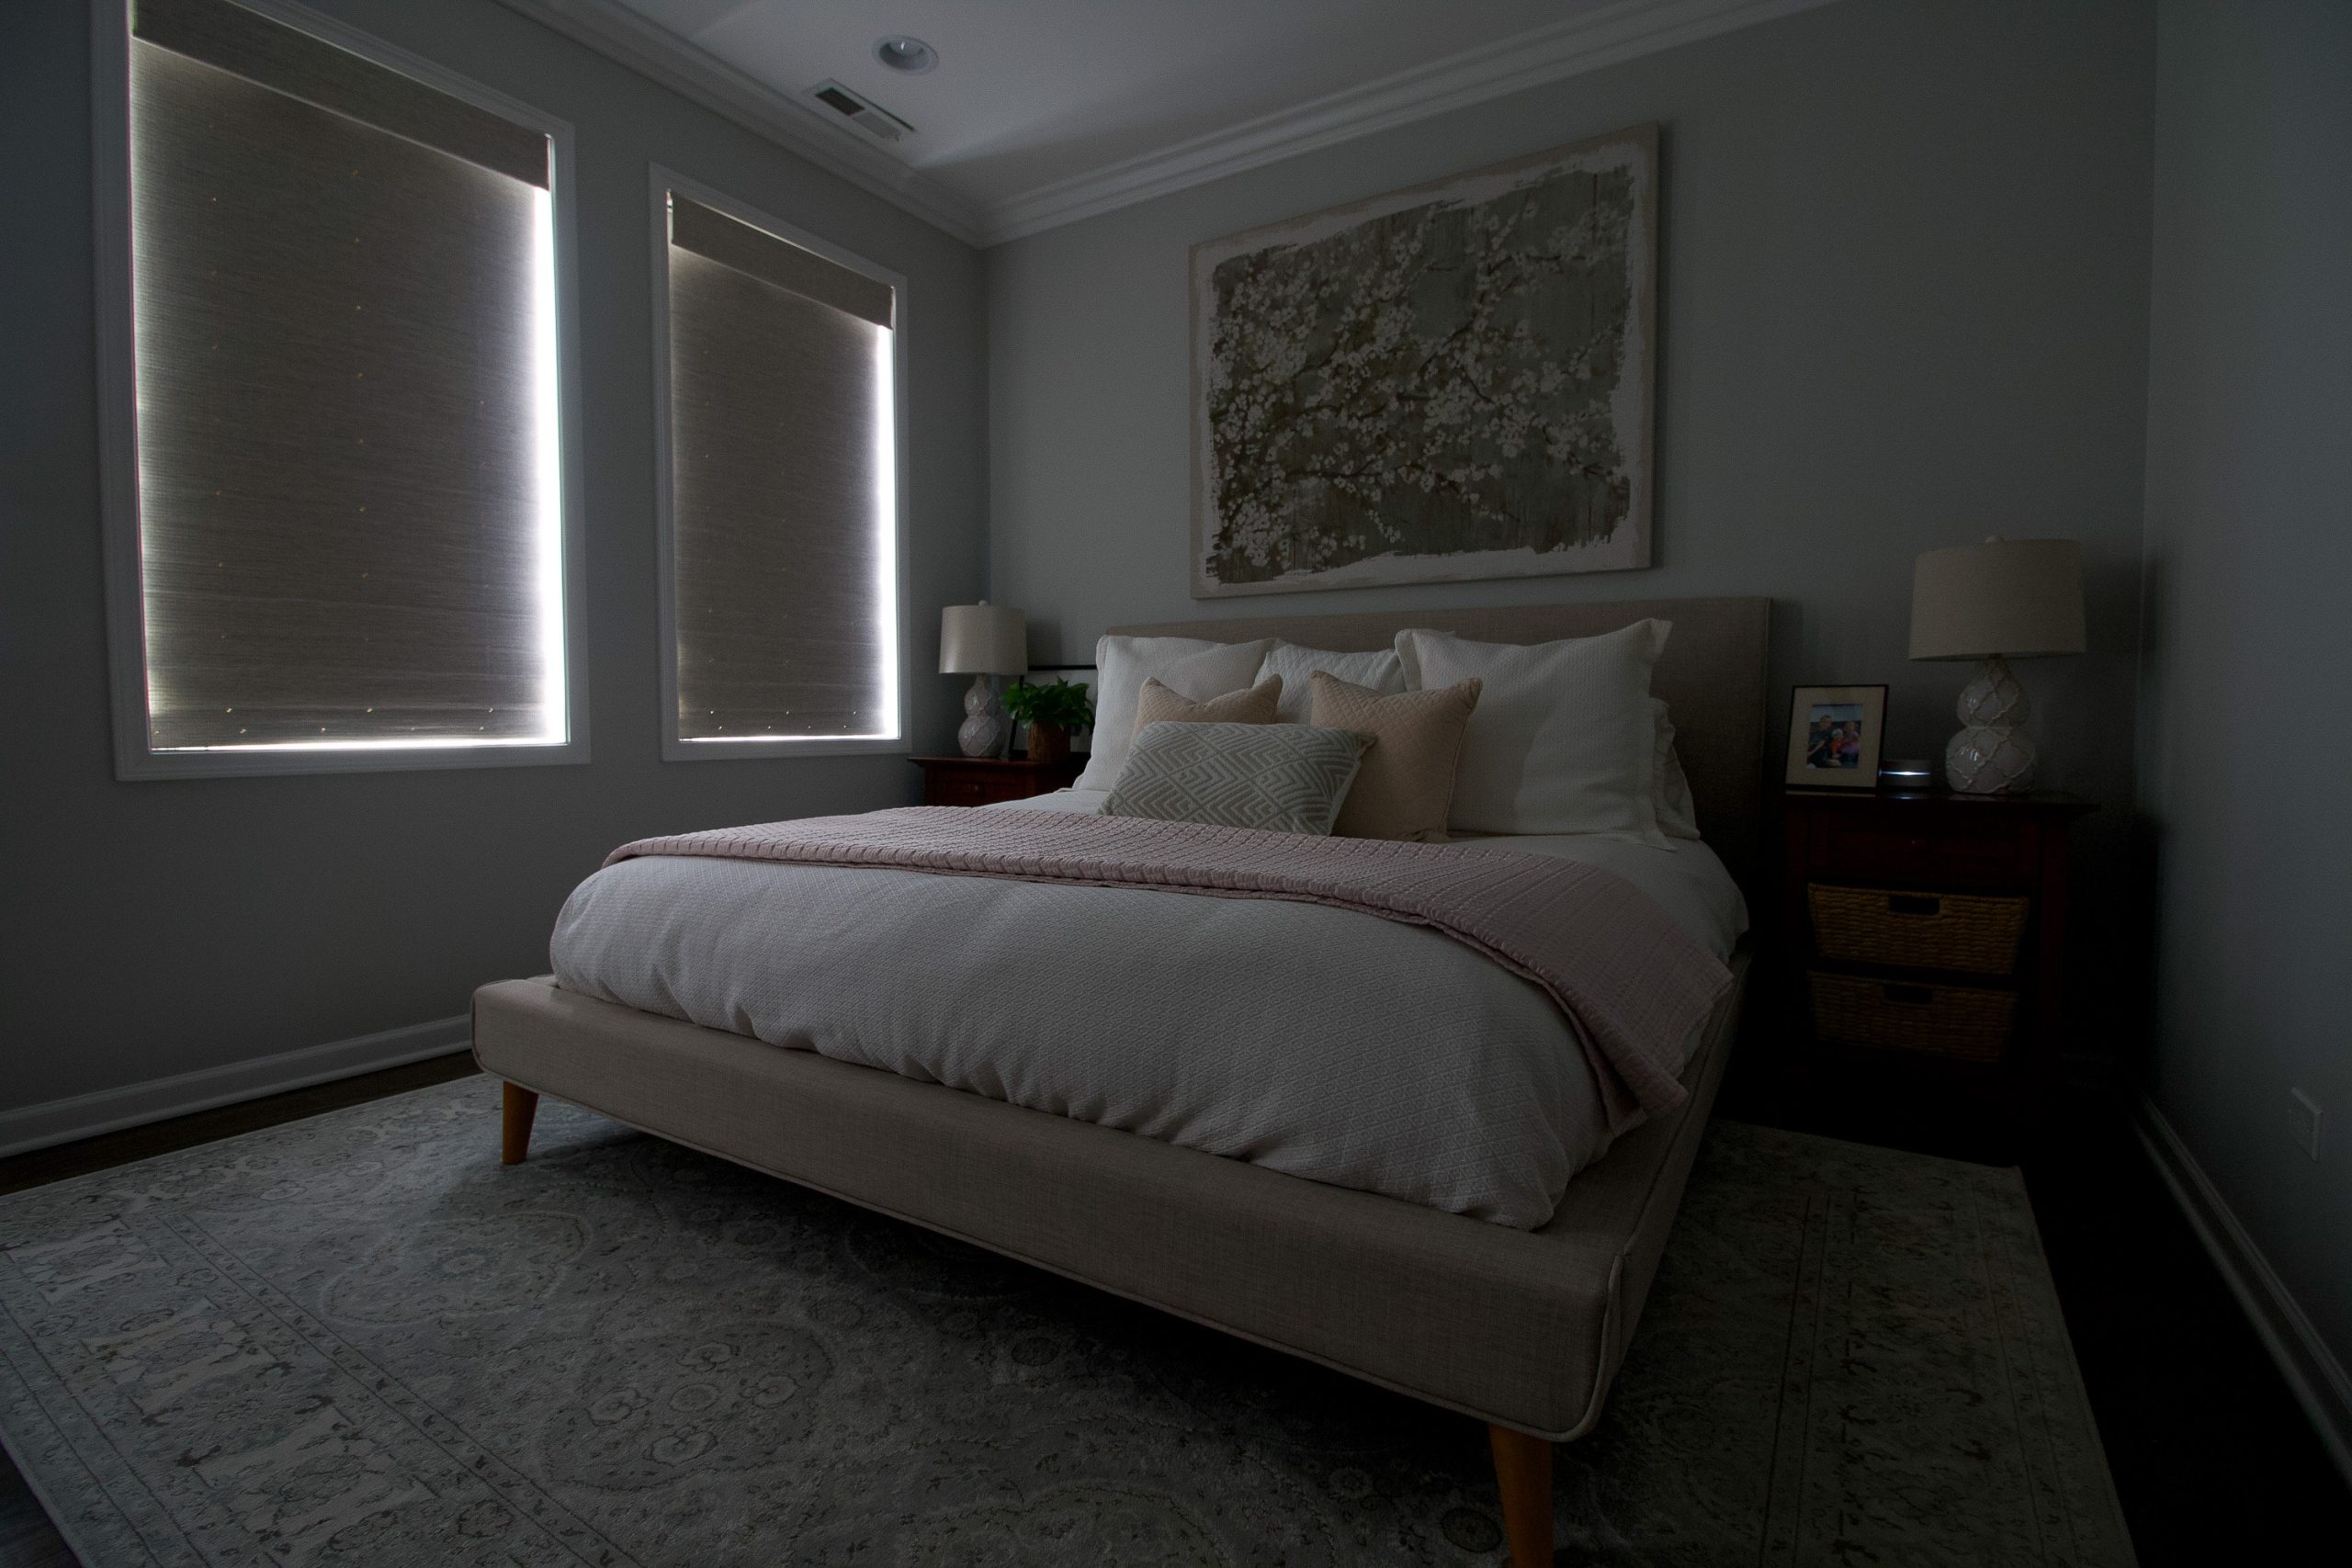 Choosing blackout shades for a bedroom